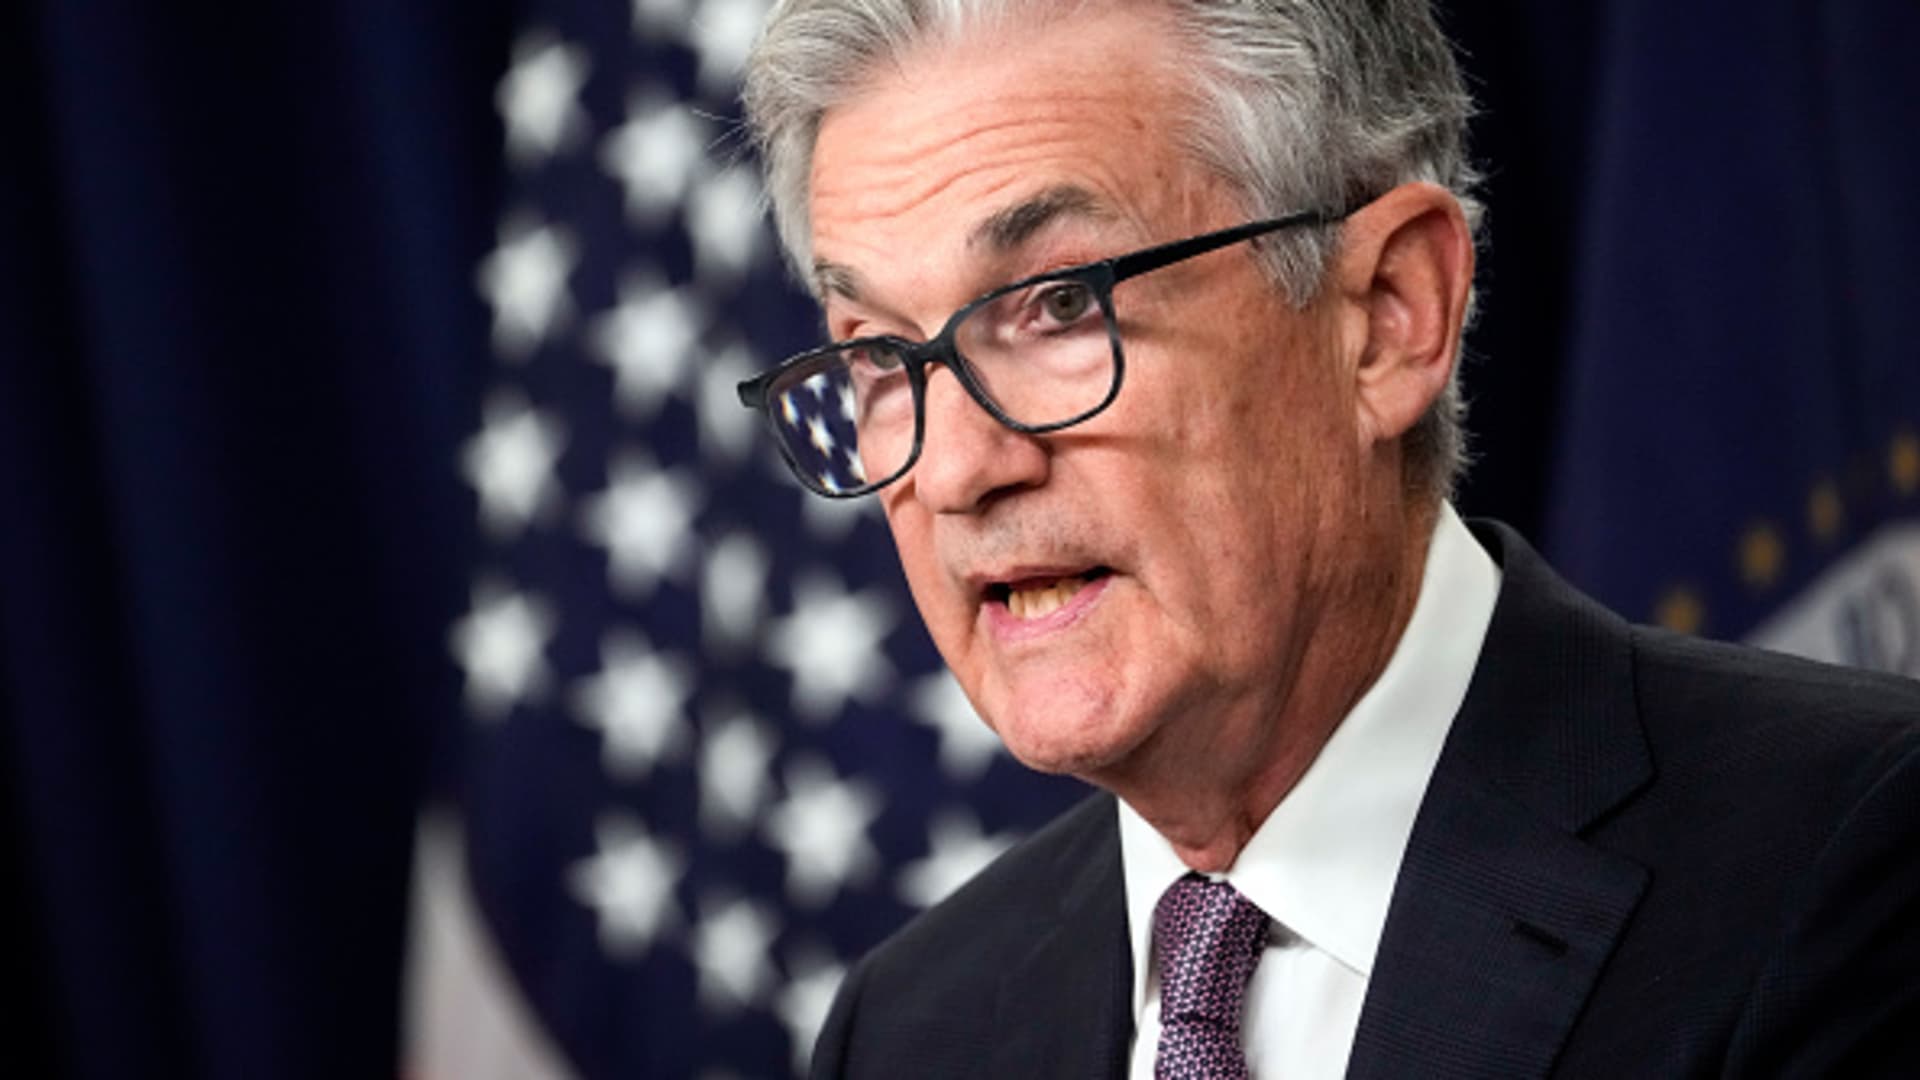 The Fed just made a 'jumbo' interest rate hike of 75 basis points—here are 4 things that will be more expensive